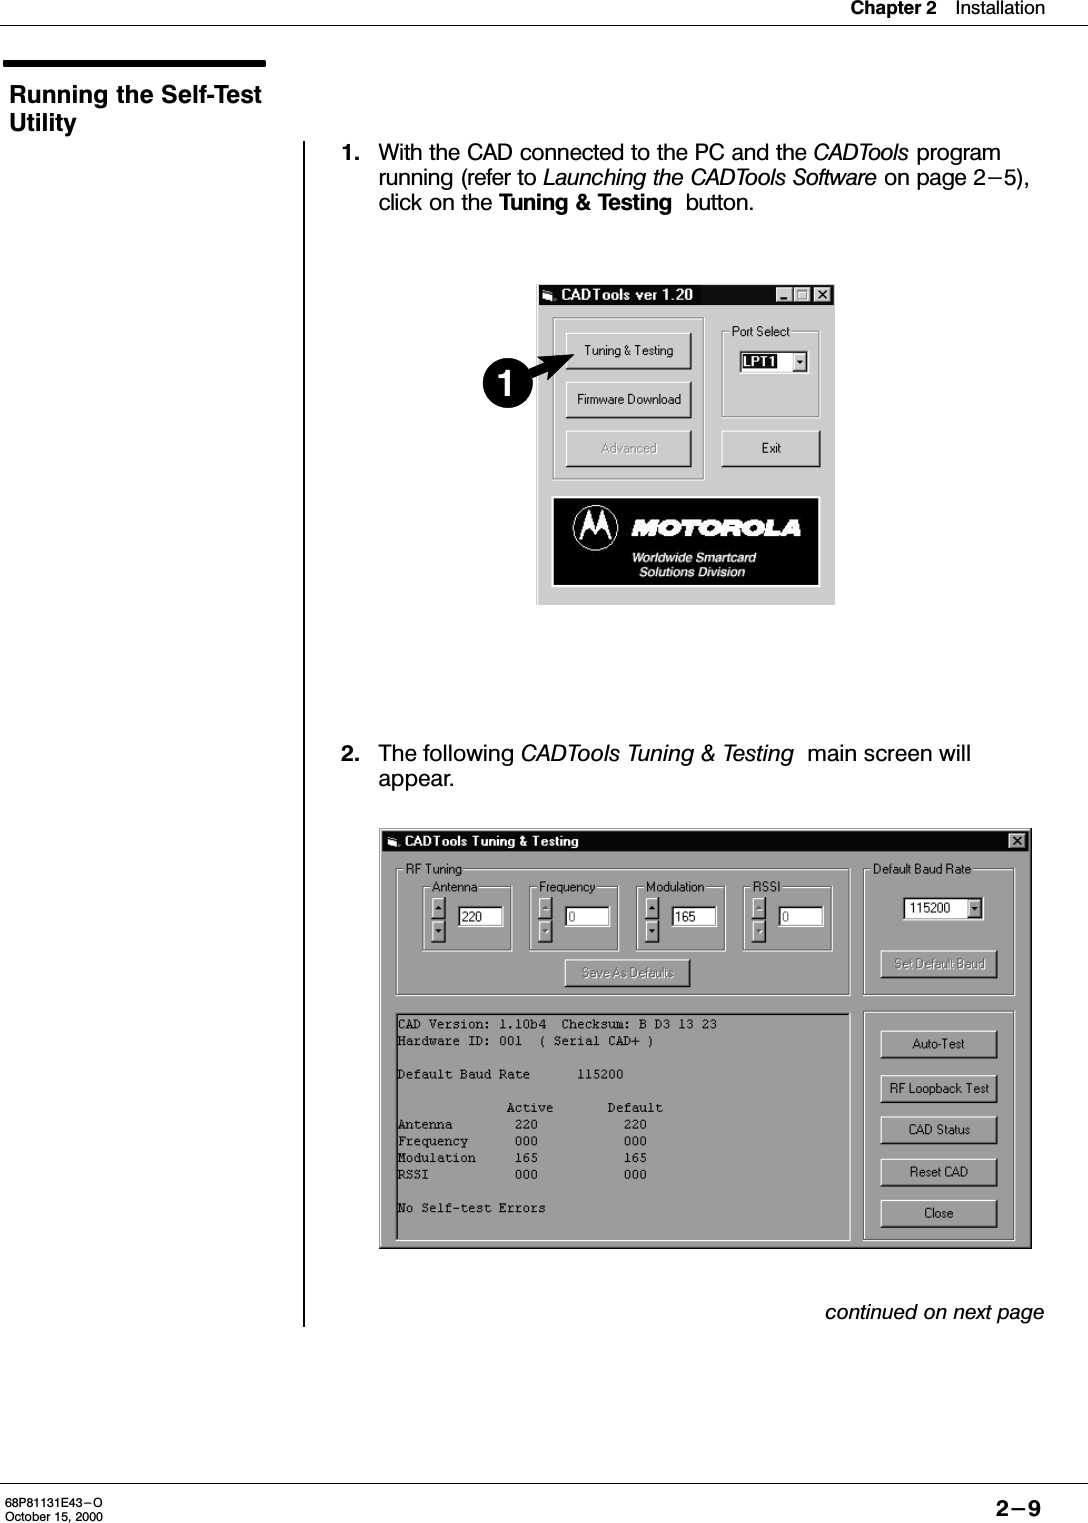 Chapter 2Installation2-968P81131E43-OOctober 15, 2000Running the SelfTestUtility1. With the CAD connected to the PC and the CADTools programrunning (refer to Launching the CADTools Software on page 2-5),click on the Tuning &amp; Testing  button.2. The following CADTools Tuning &amp; Testing  main screen willappear.continued on next page1